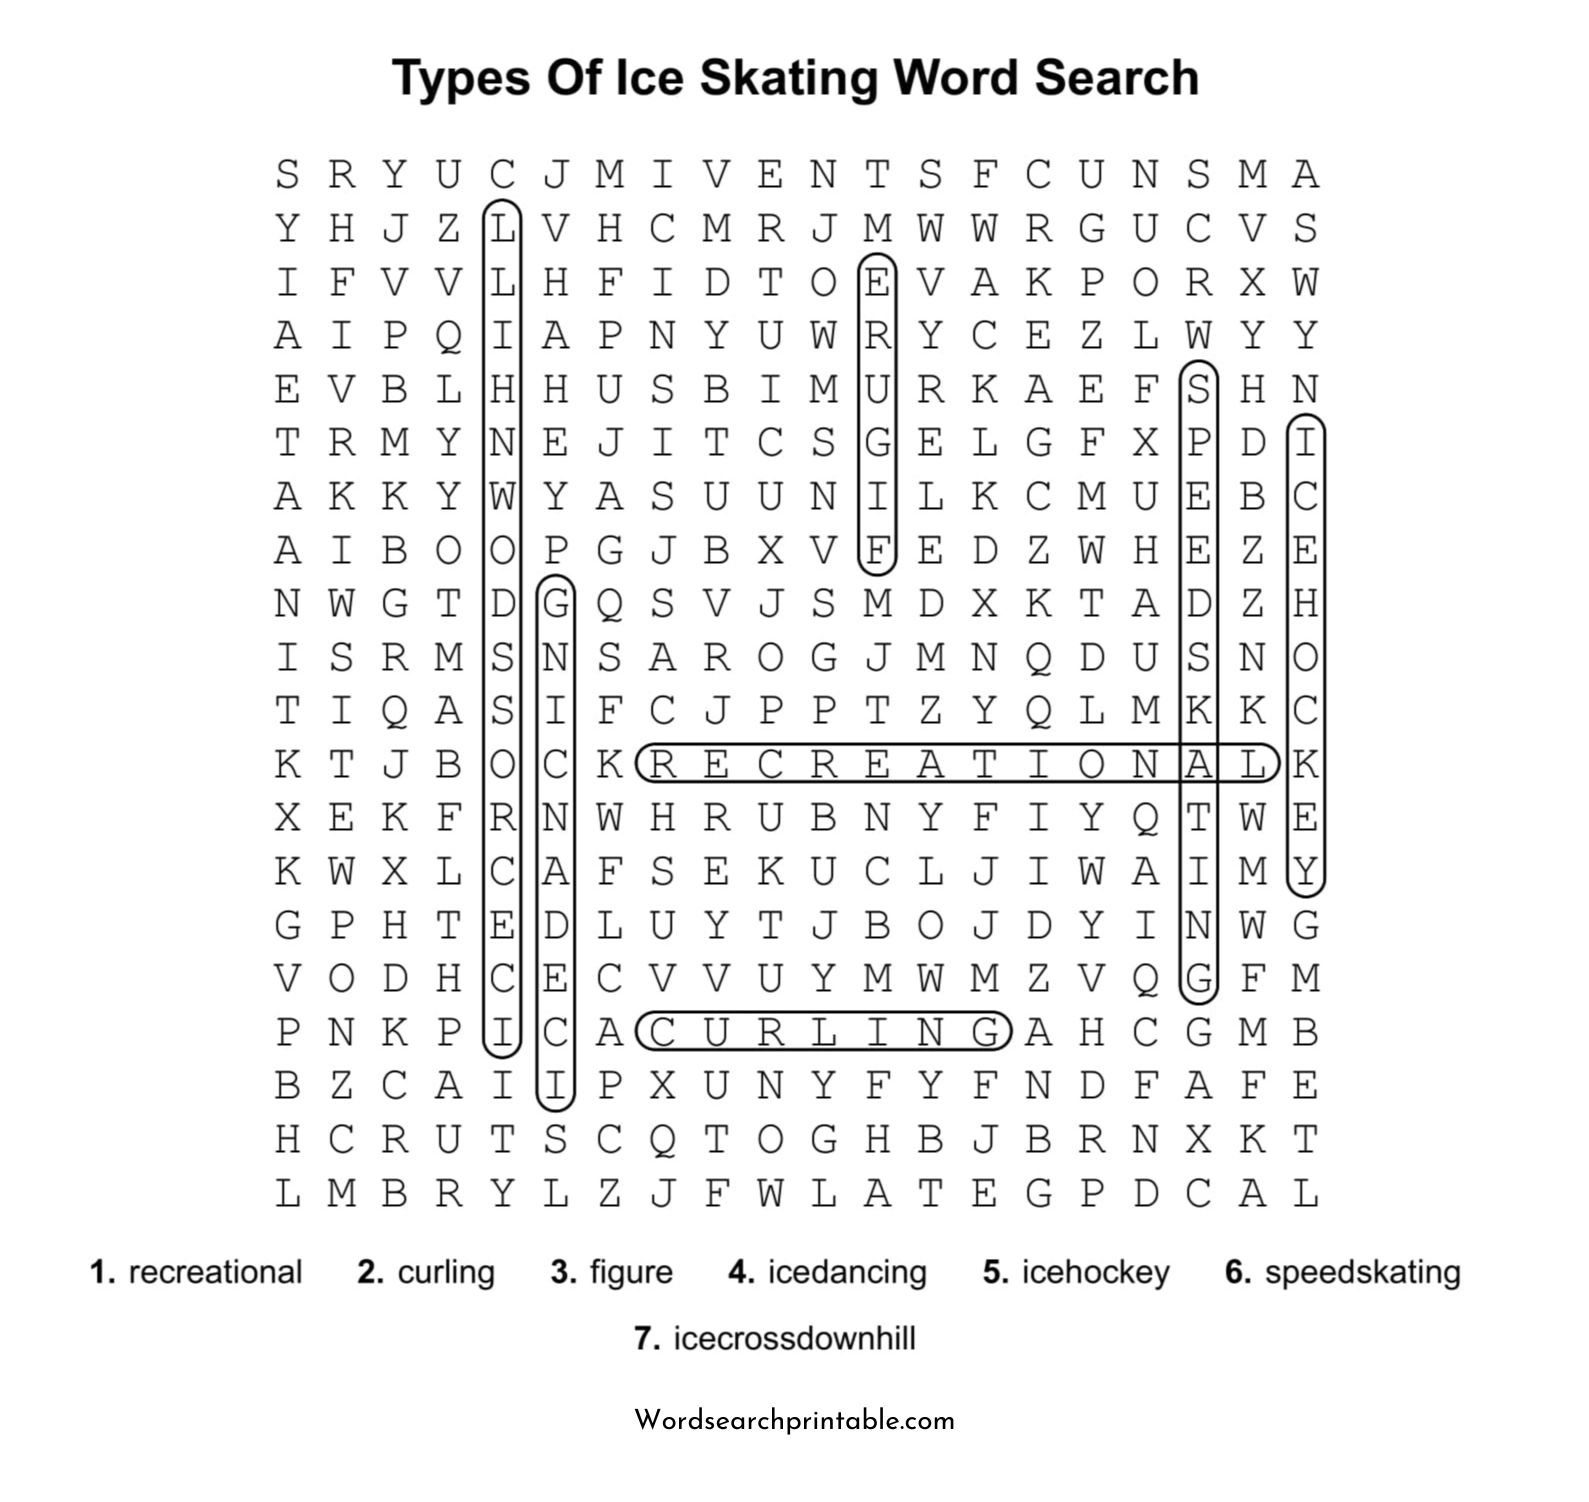 types of ice skating word search puzzle solution